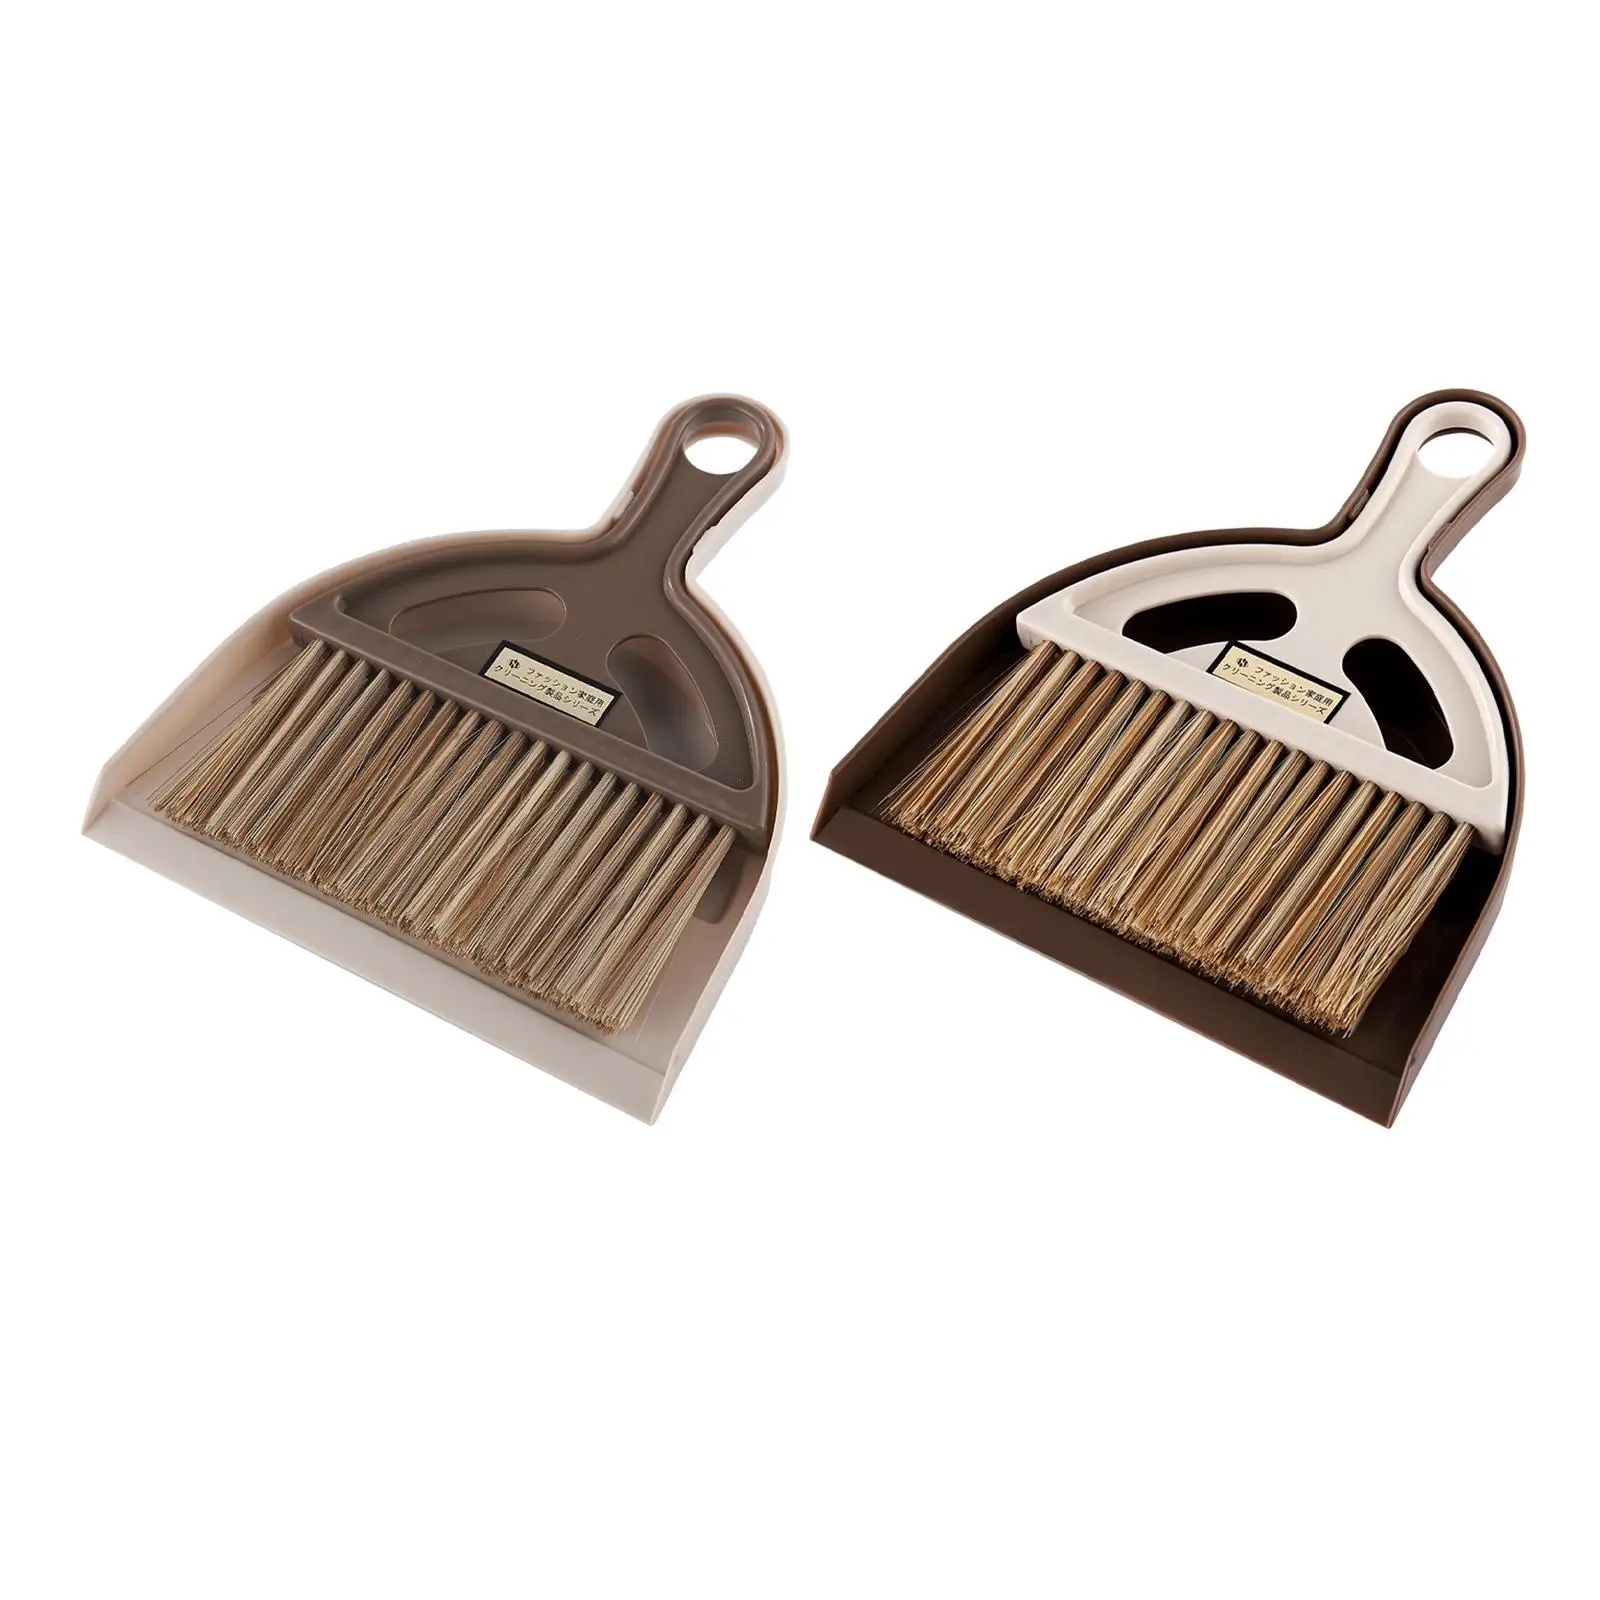 Small Broom and Dustpan Set Practical Portable for Desktop Camping Cleaning